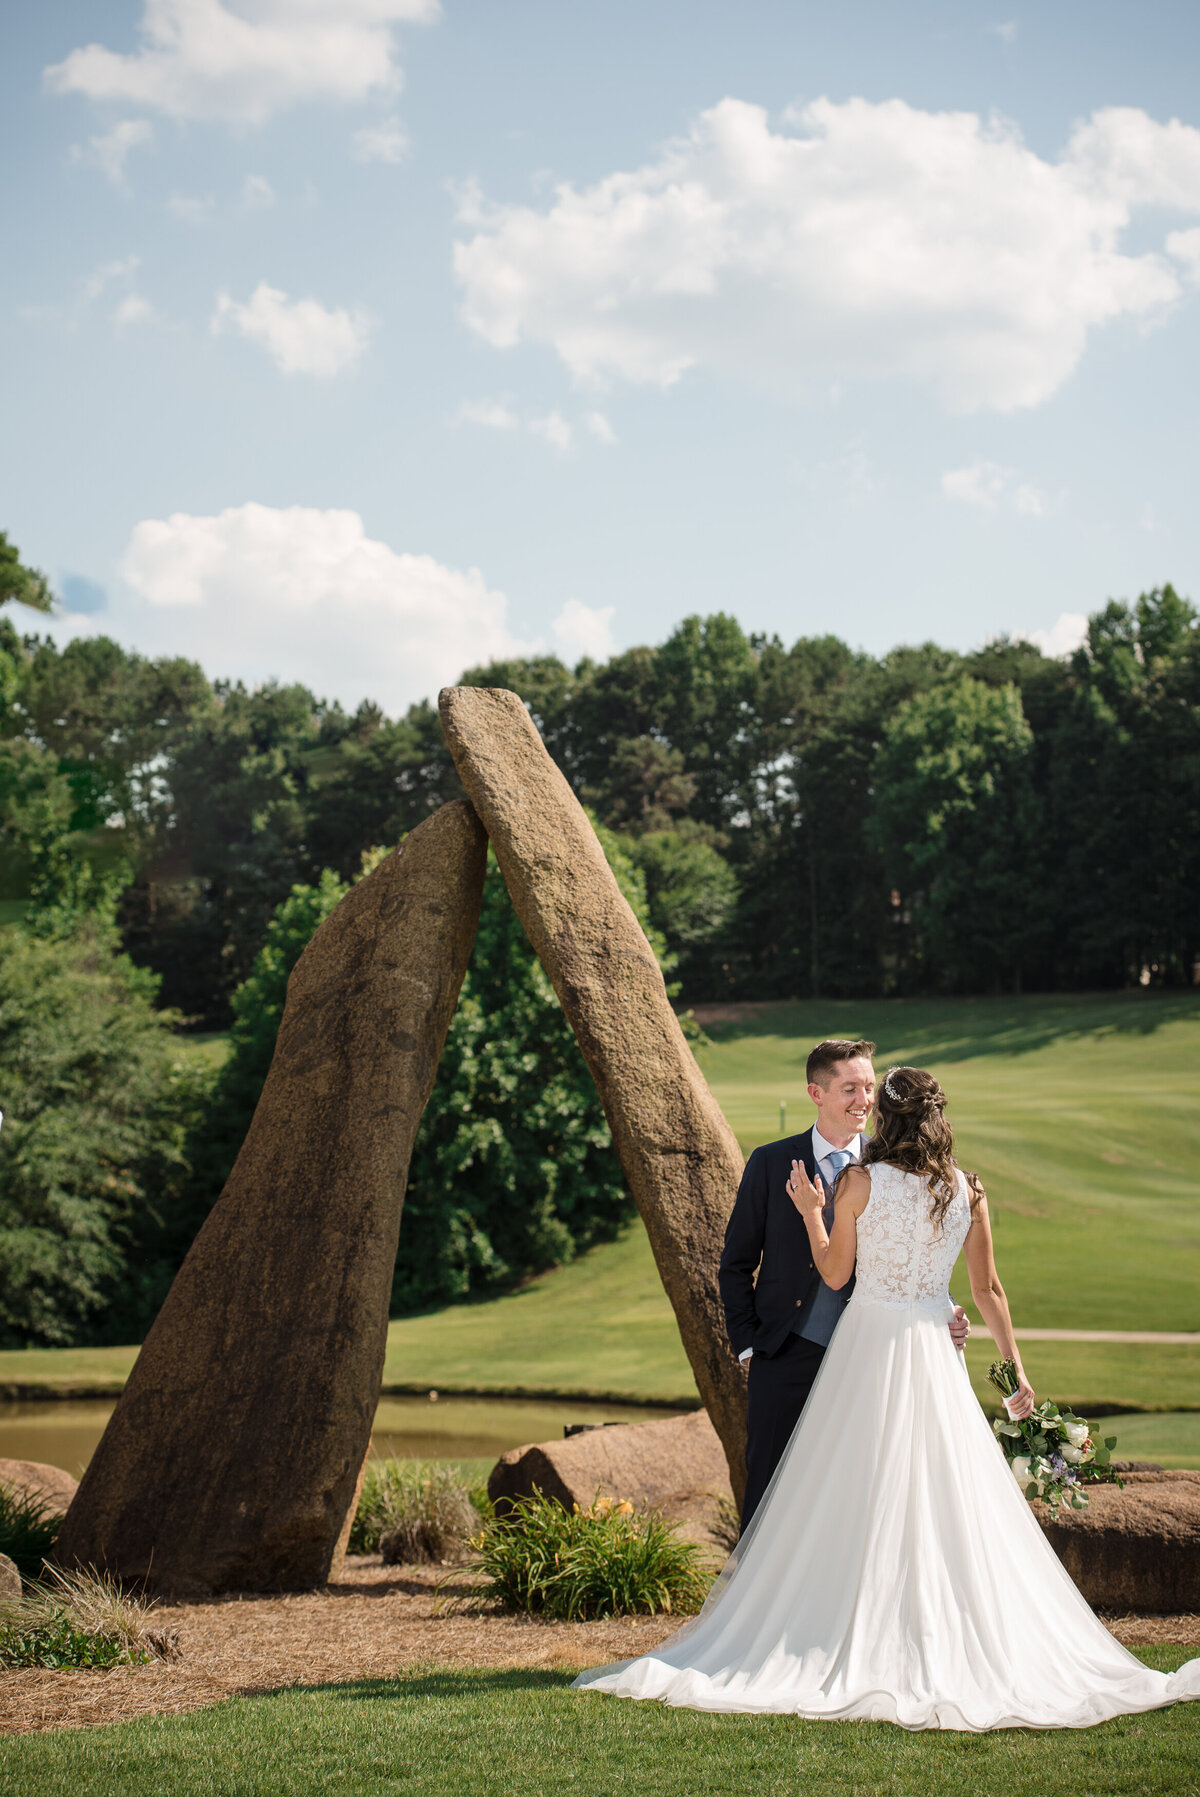 Bride and groom dancing next to the stone sculpture on the golf course at NorthStone Country Club by Charlotte wedding photographers DeLong Photography